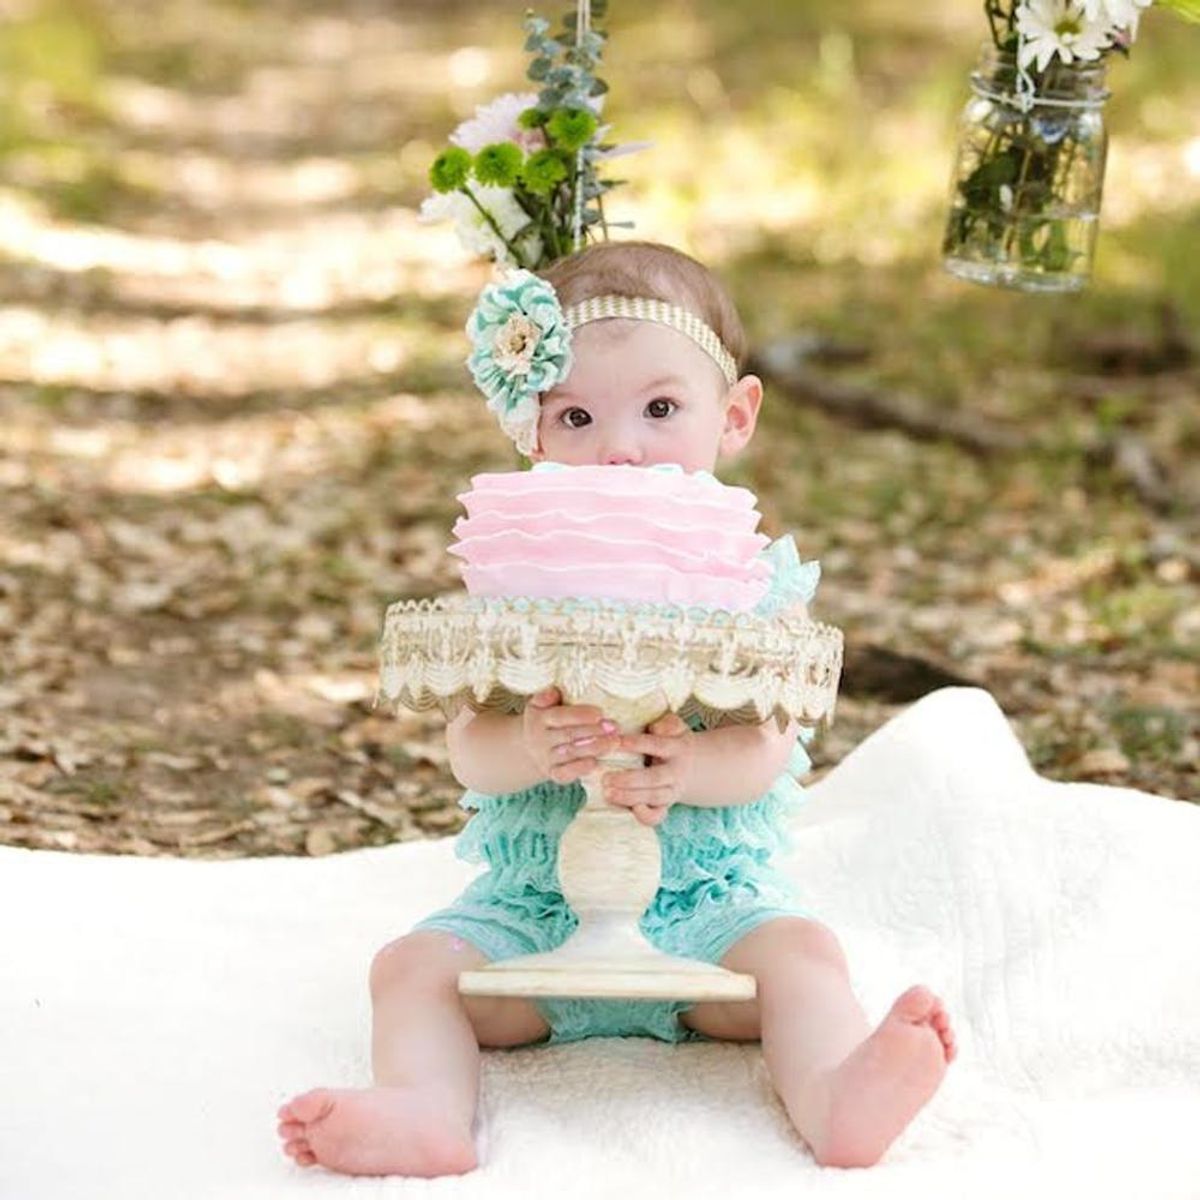 13 Seriously Adorable Cake Smash Photo Ideas for Baby’s First Birthday